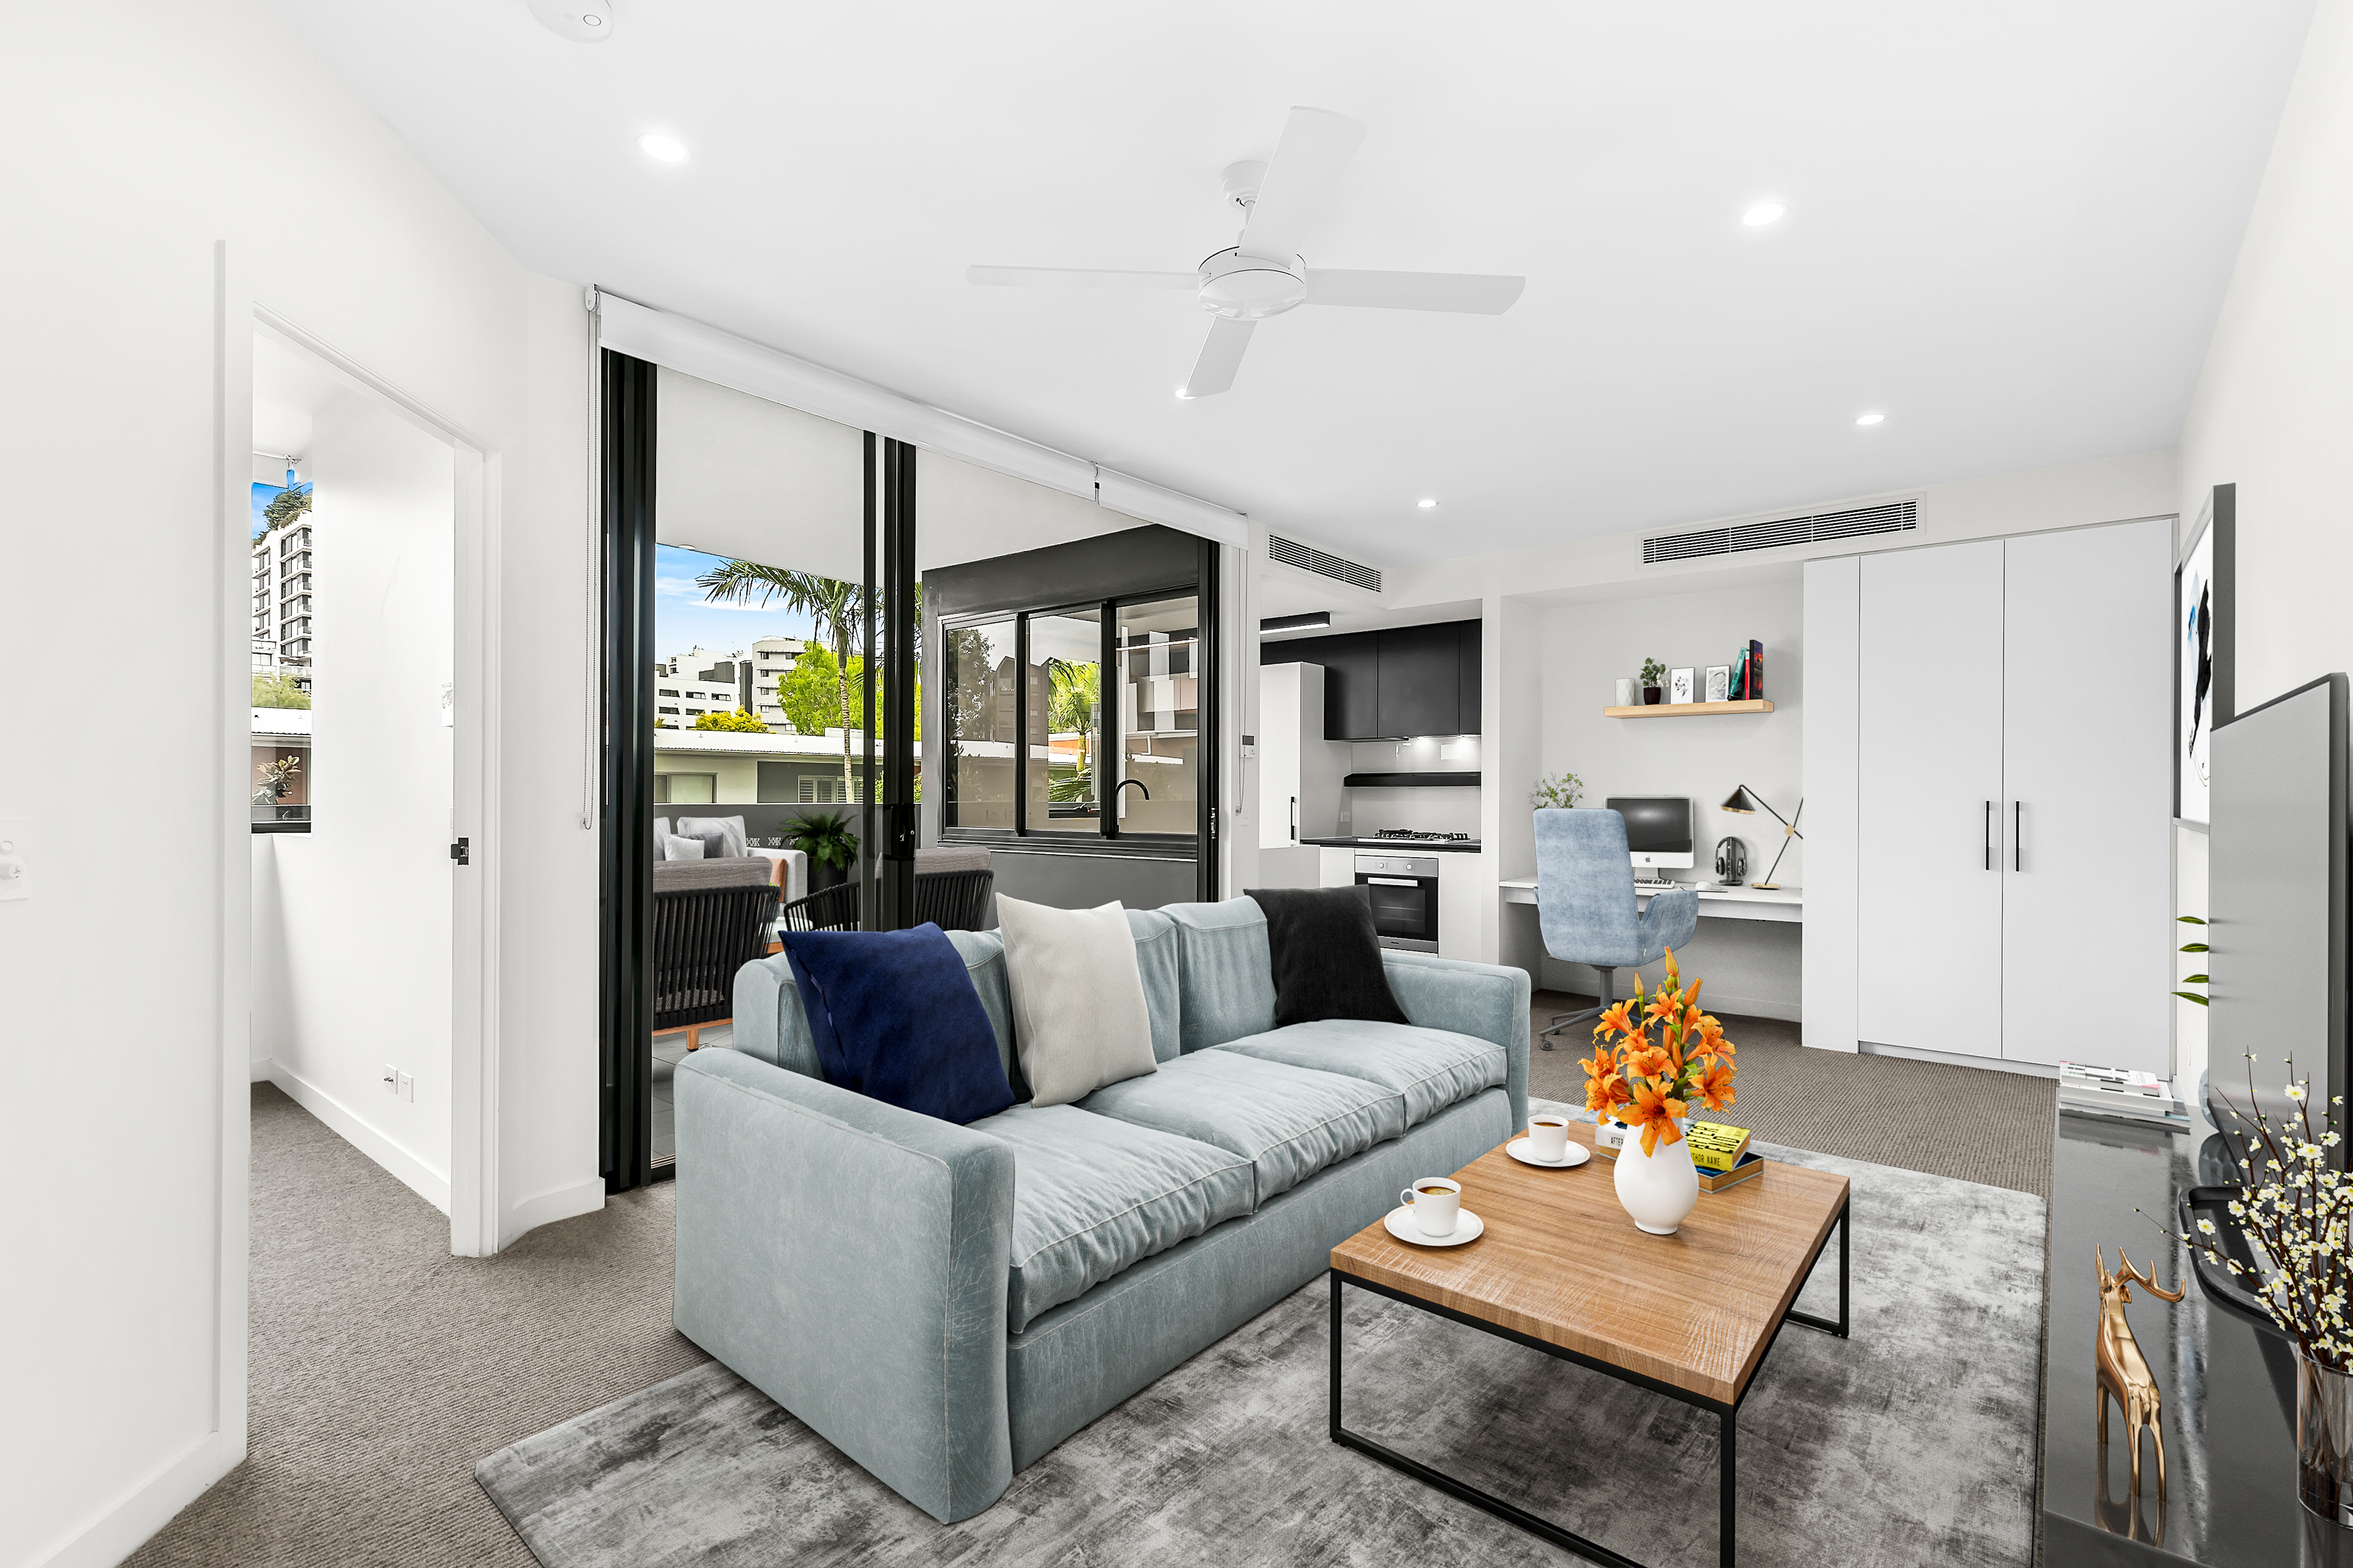 Leased Apartment 215/8 Donkin Street, West End QLD 4101 - Dec 20, 2022 ...